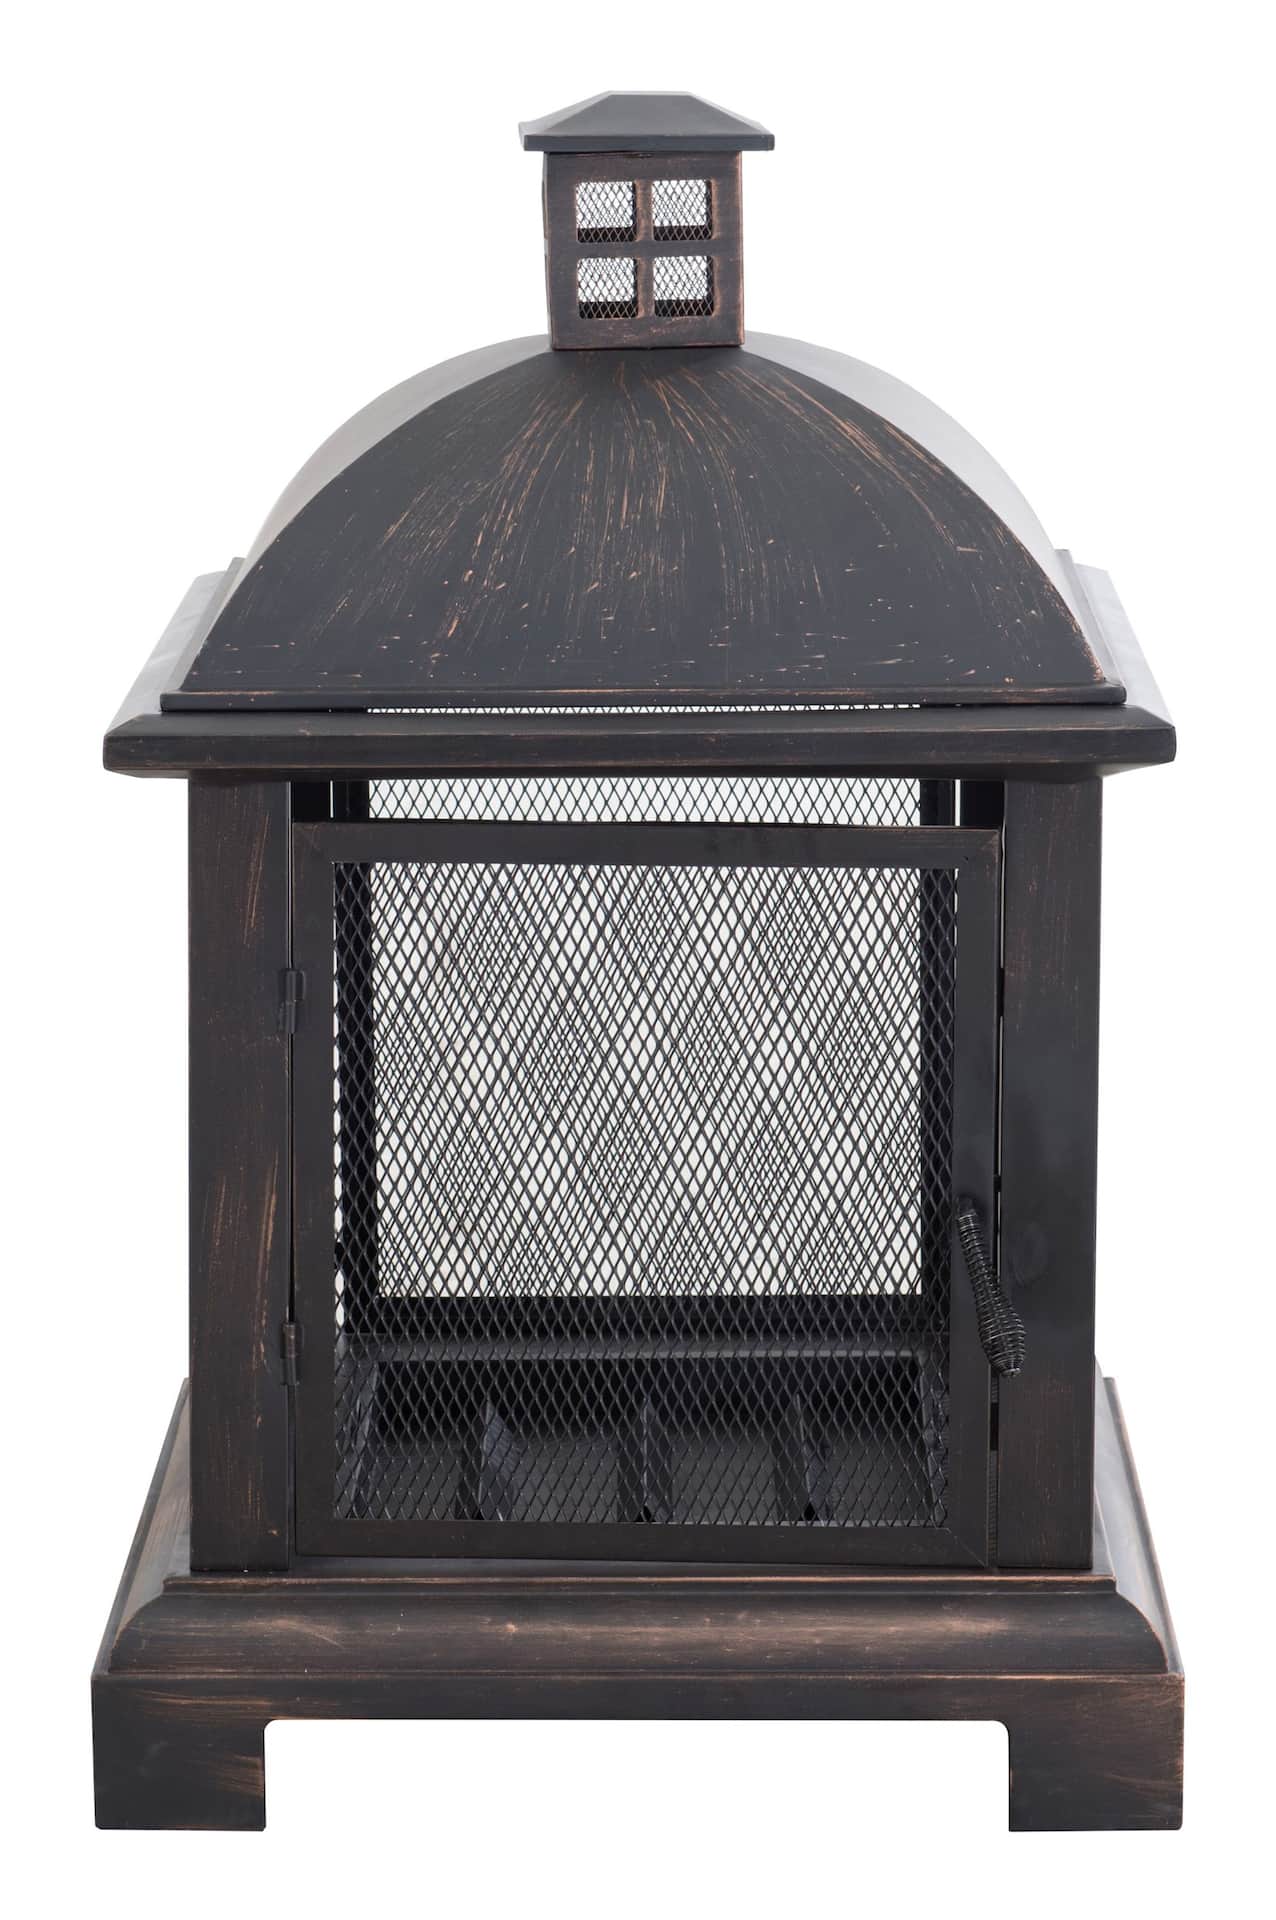 For Living Marseille Outdoor Wood Fireplace, 26 x 26 x 40-in Canadian Tire